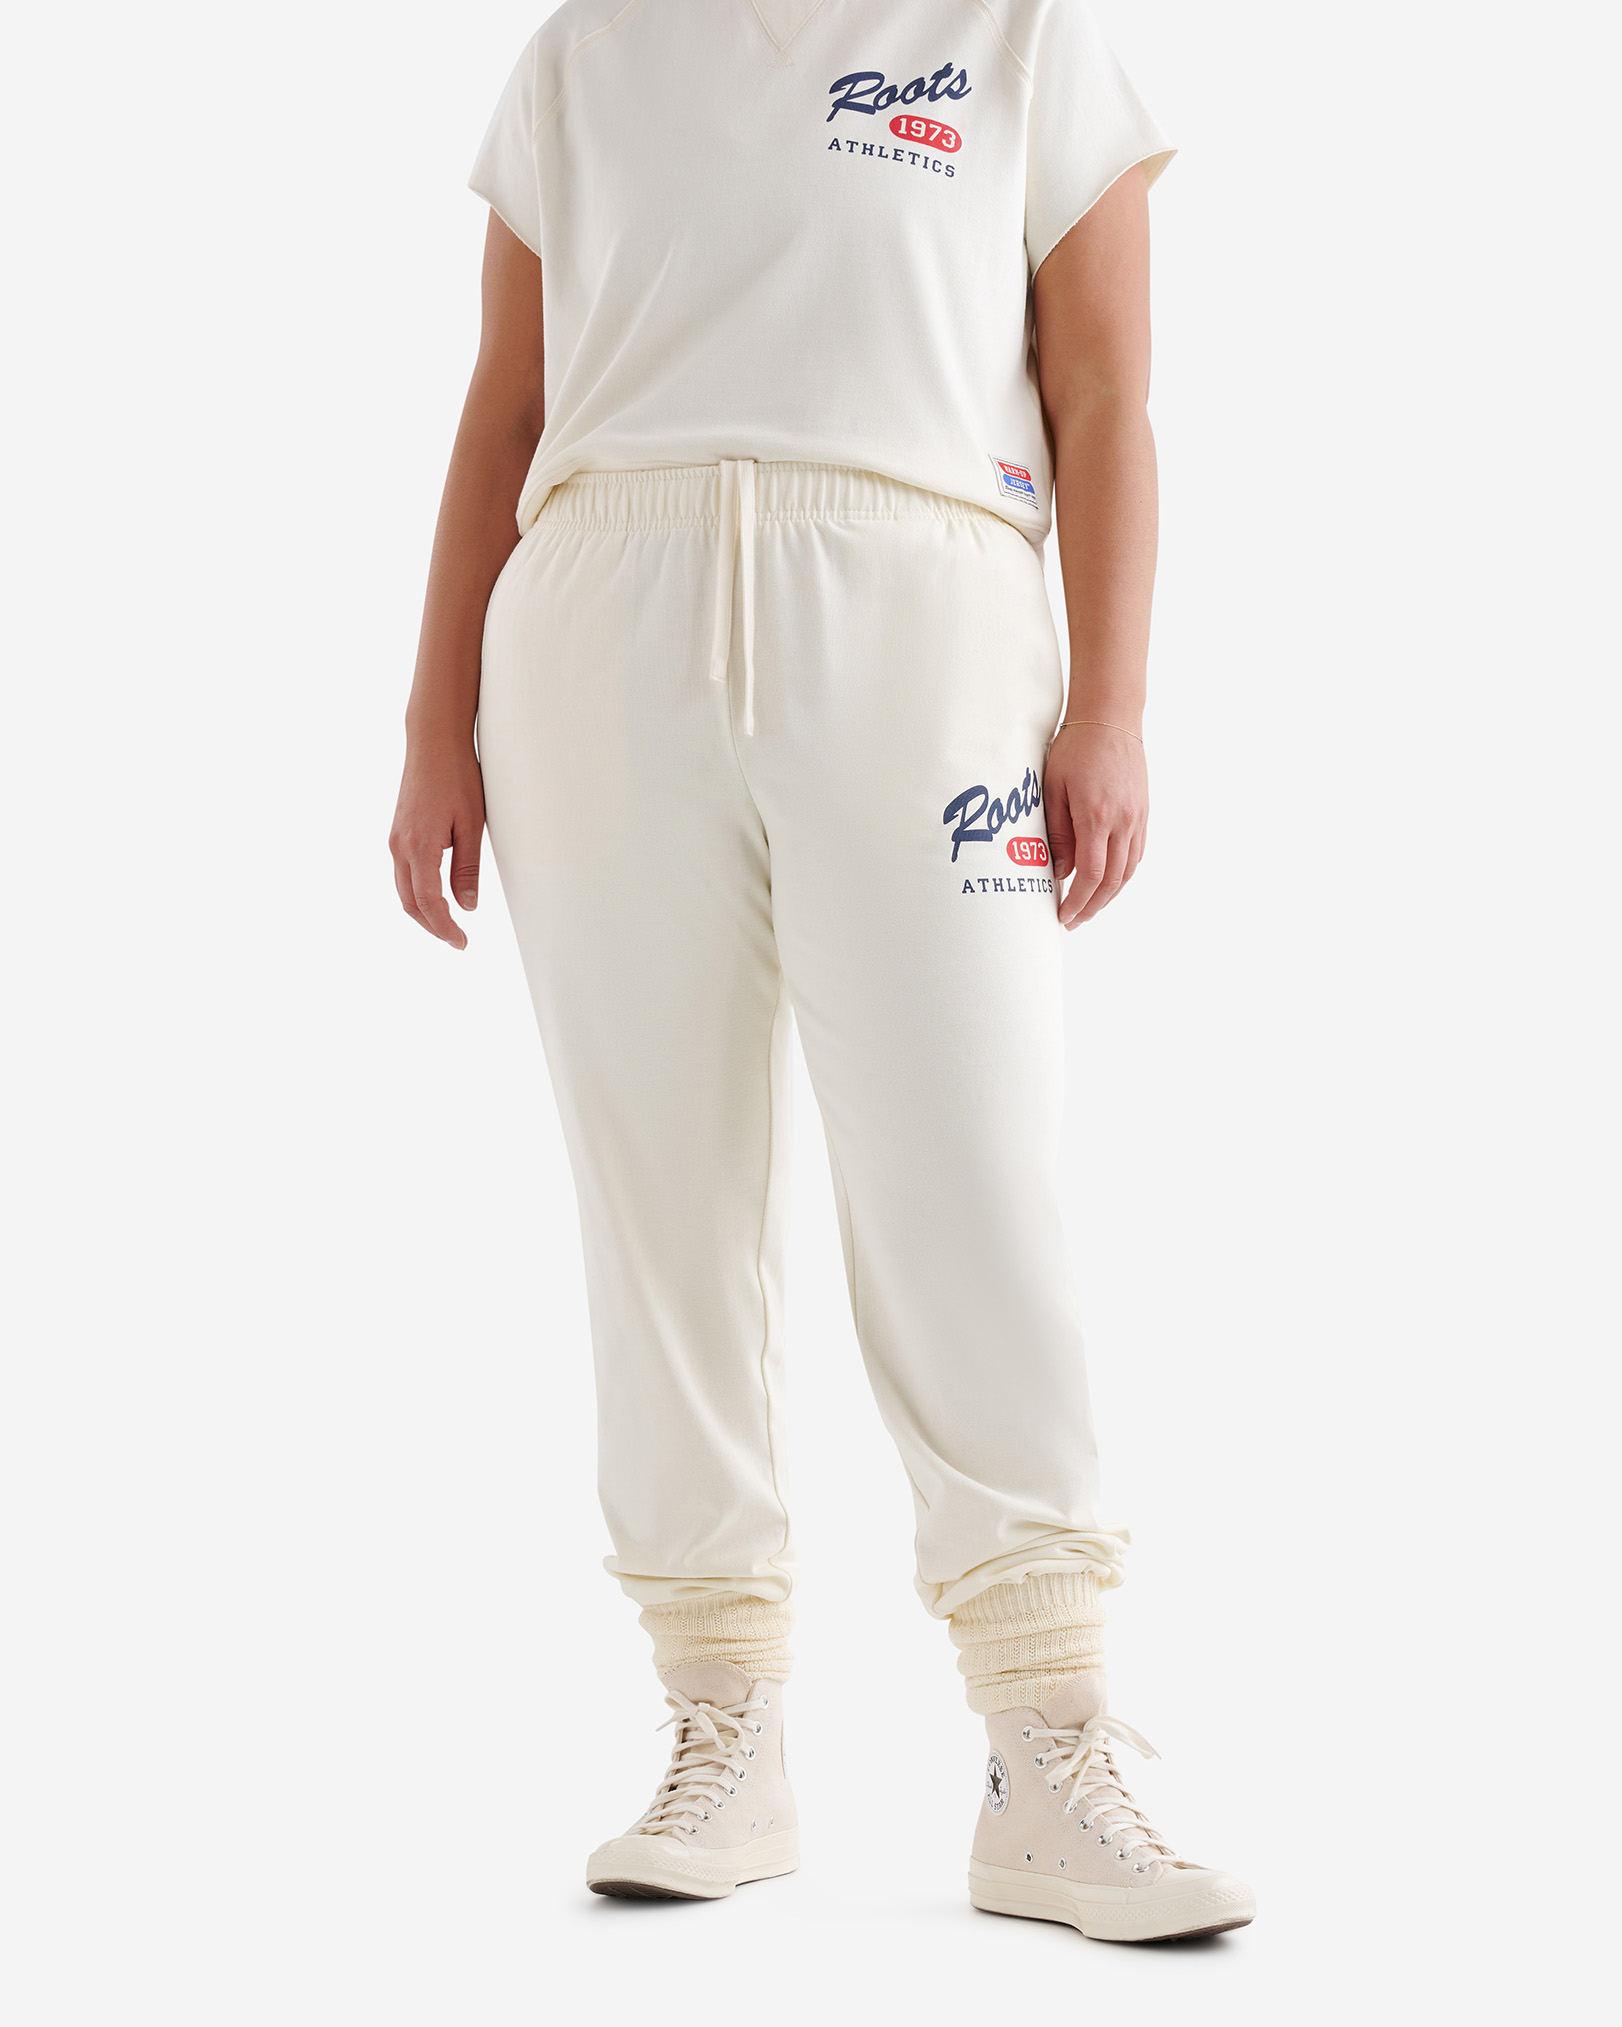 Roots Warm-Up Jersey Pant in Vanilla Ice